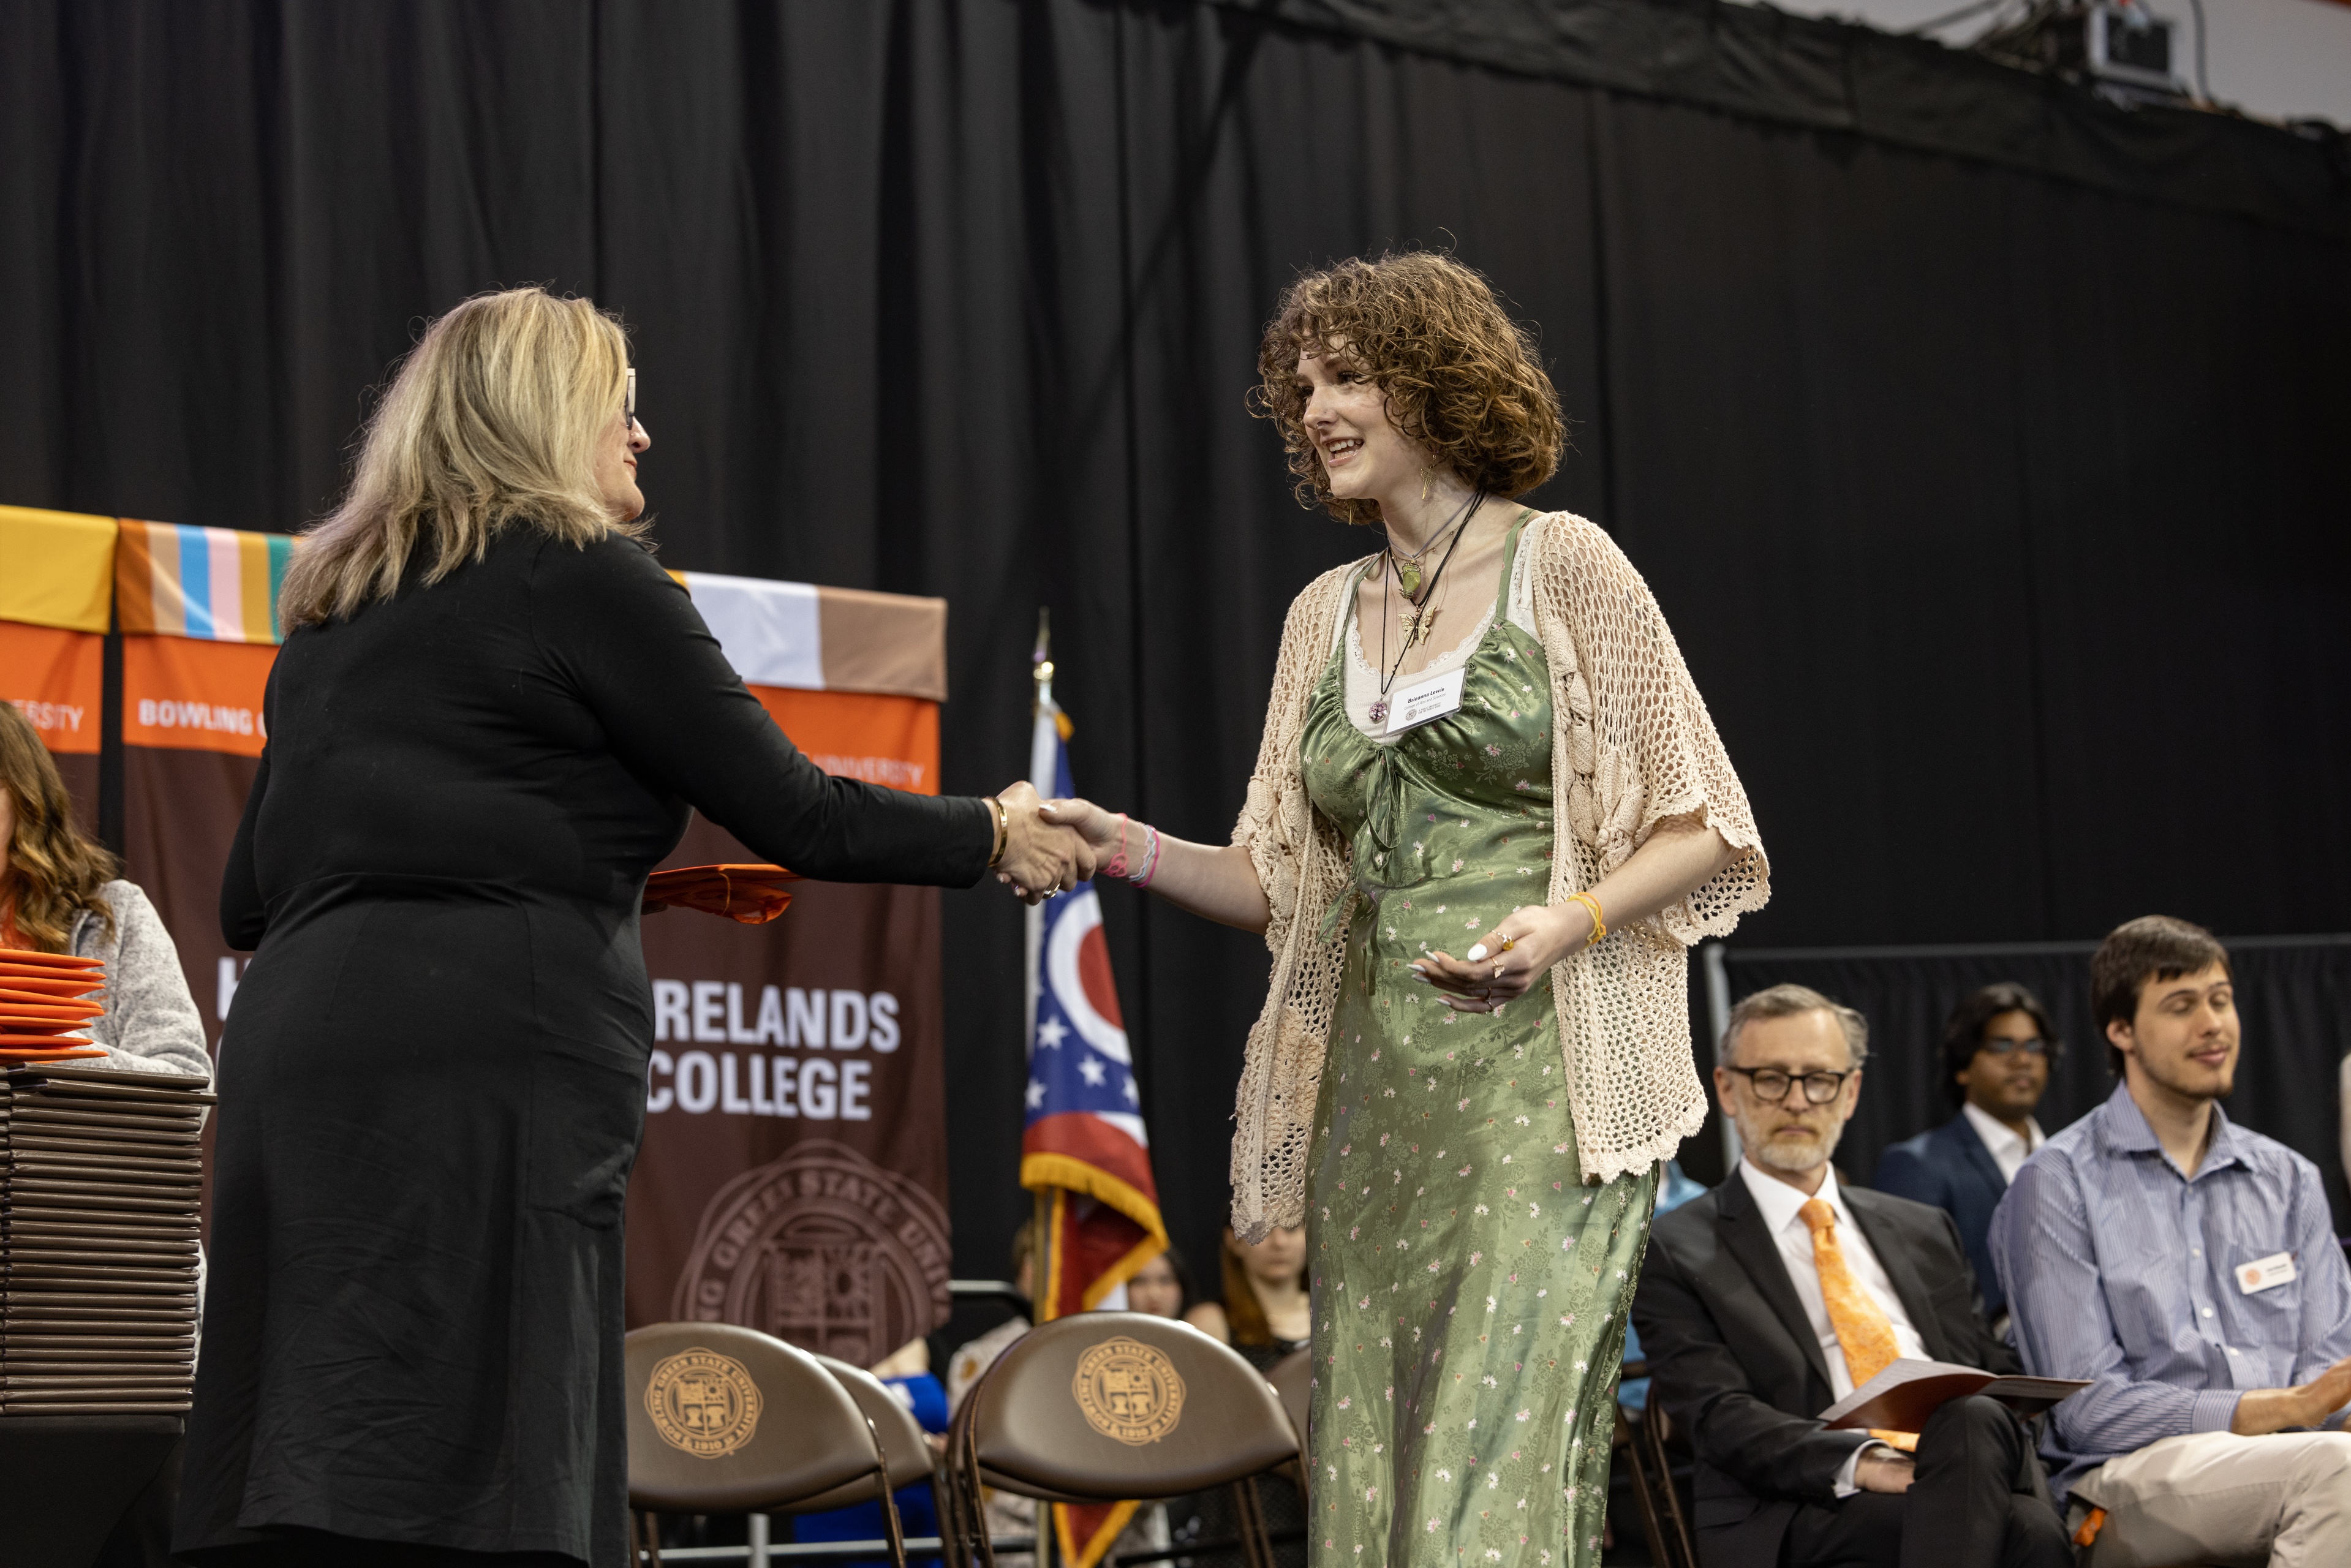 Two women shake hands on a stage.